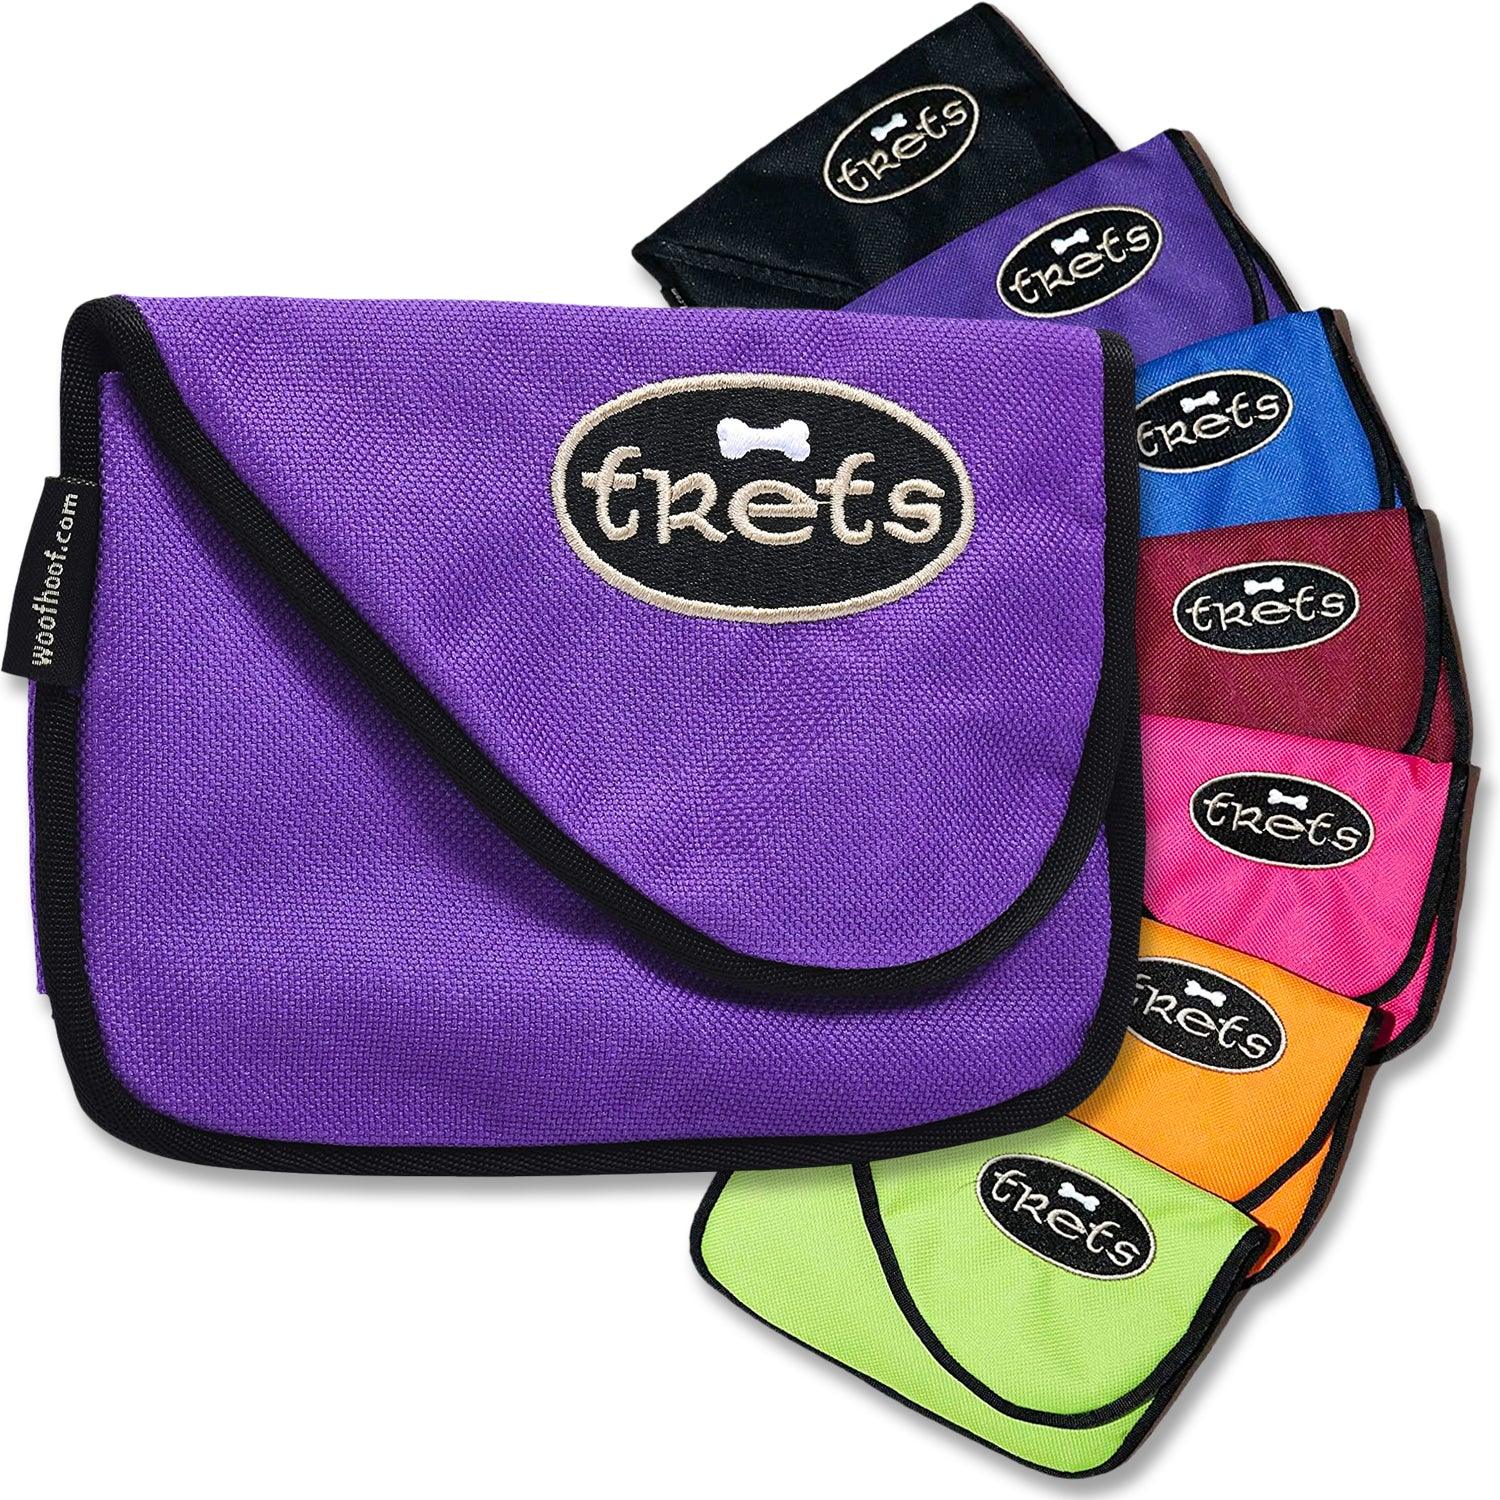 Purple dog treat pouch shown with other color options